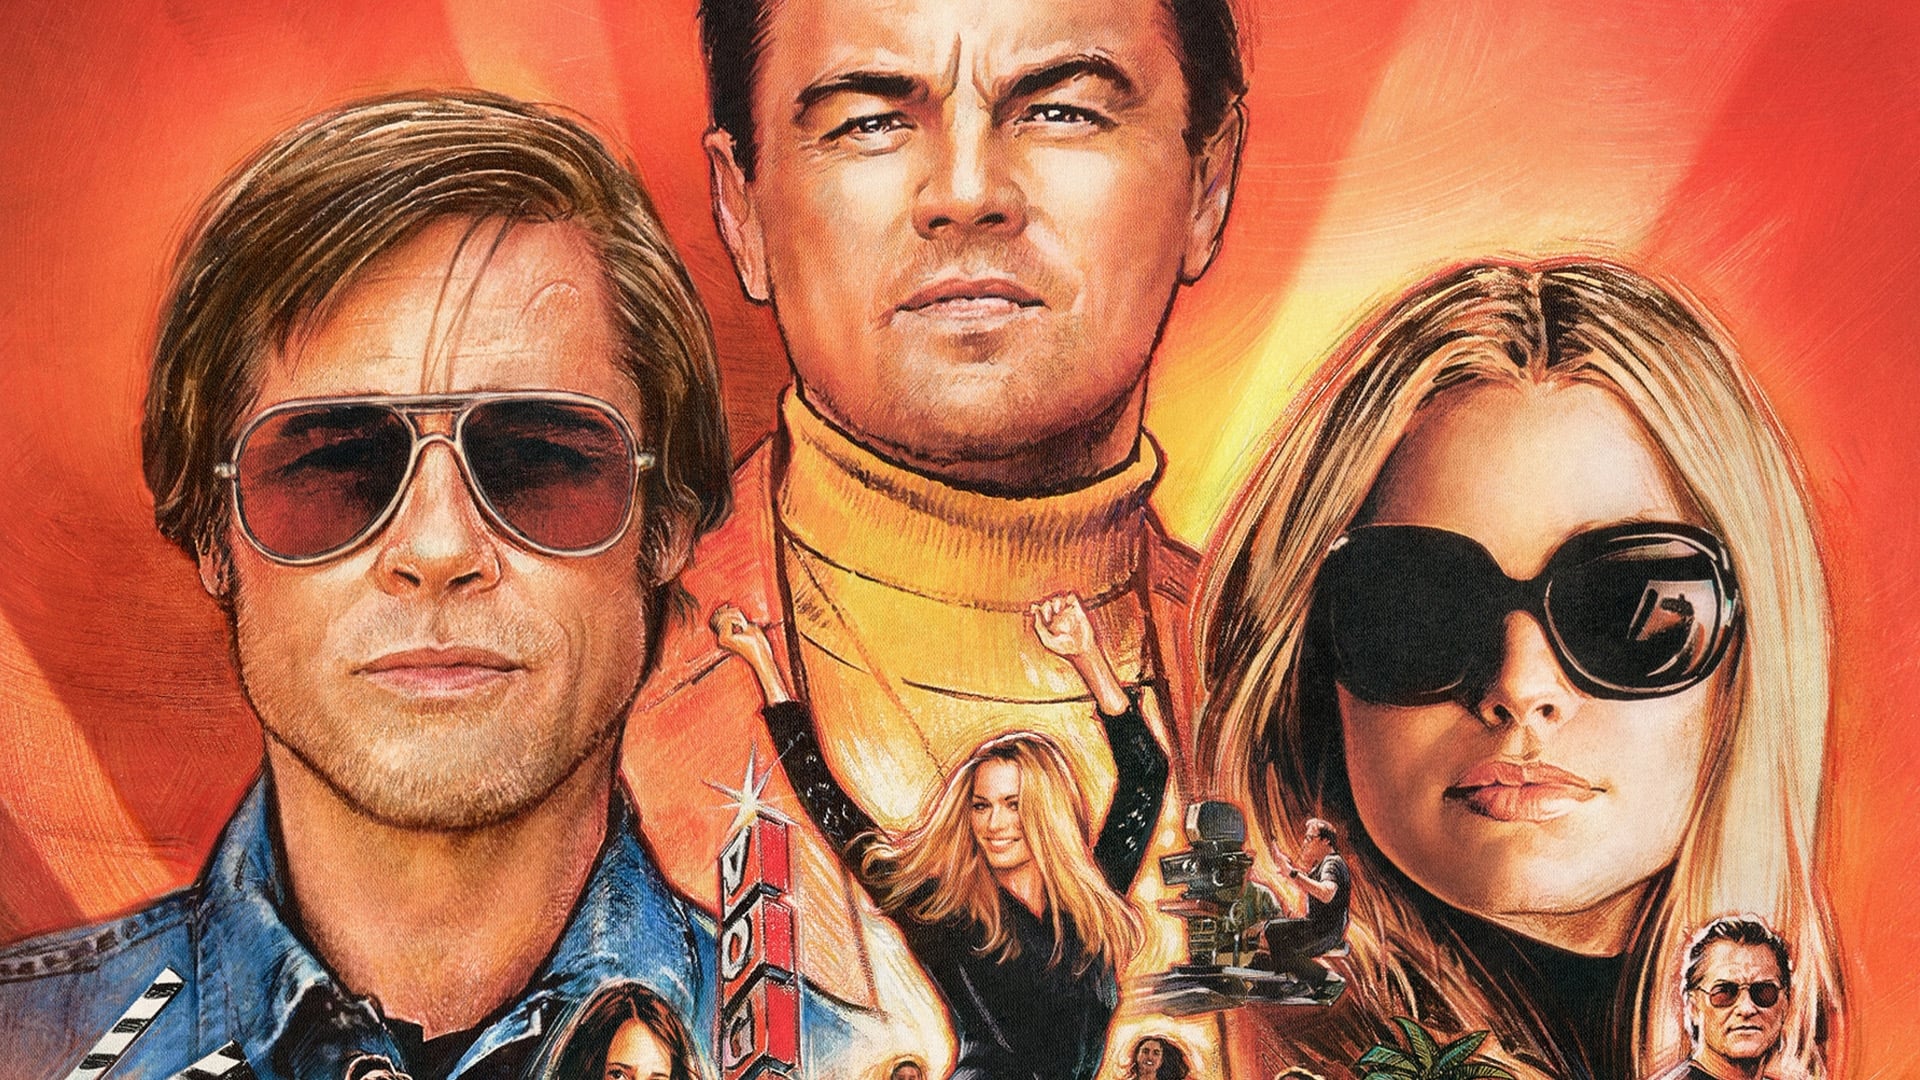 Image du film Once Upon a Time... in Hollywood z5qz9oxdcq81jkdkhtghapxy6pjjpg